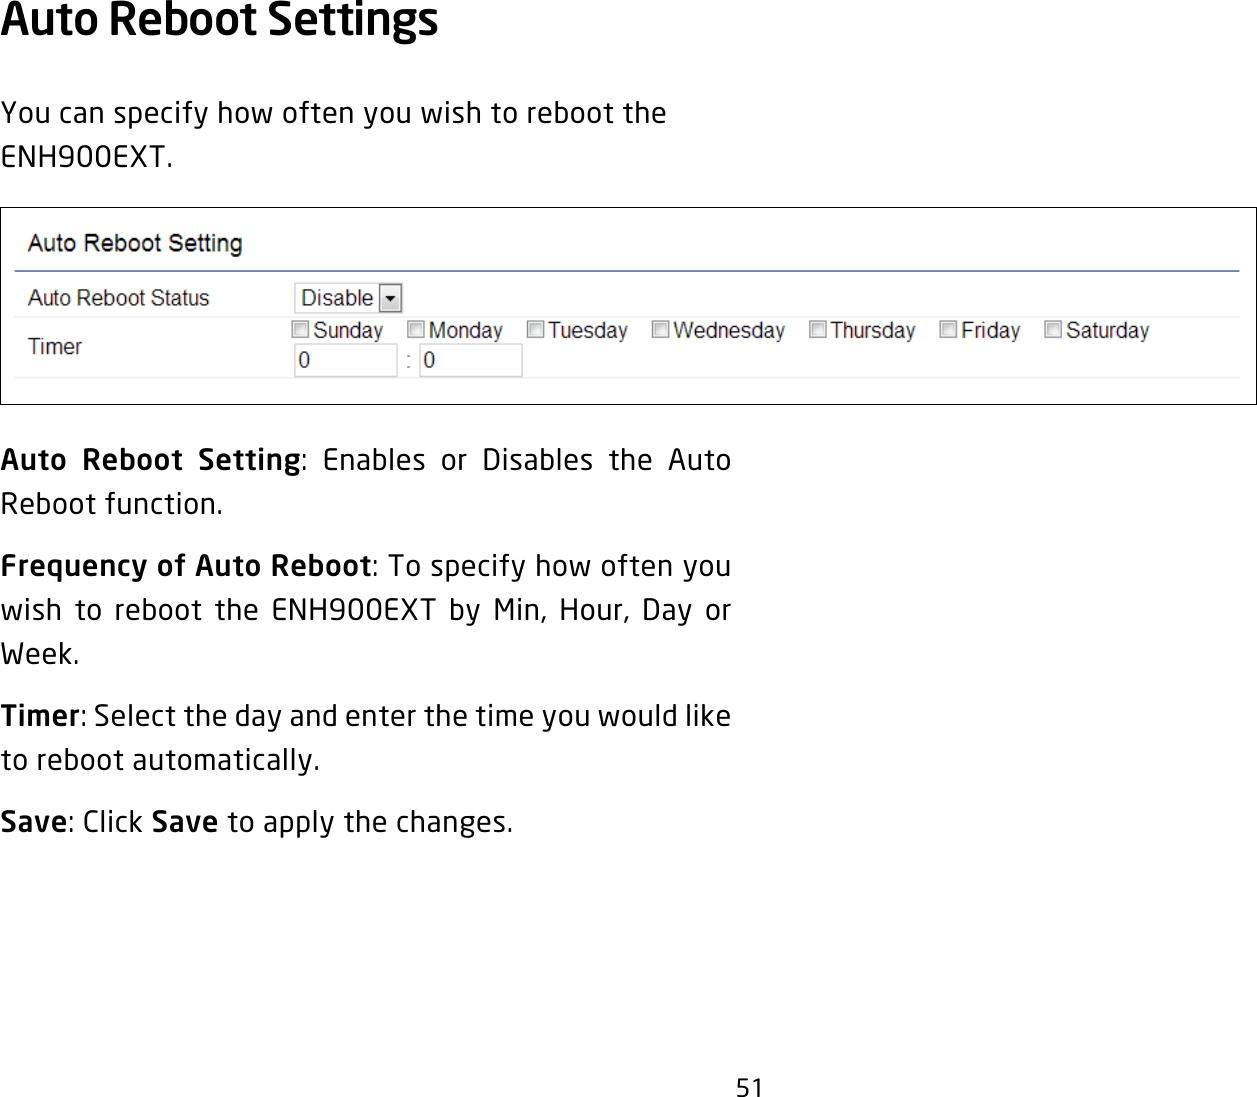 51Auto Reboot Settings You can specify how often you wish to reboot the ENH900EXT.Auto Reboot Setting: Enables or Disables the Auto Reboot function.Frequency of Auto Reboot: To specify how often you wish to reboot the ENH900EXT by Min, Hour, Day or Week.Timer: Select the day and enter the time you would like to reboot automatically.Save: Click Save to apply the changes.